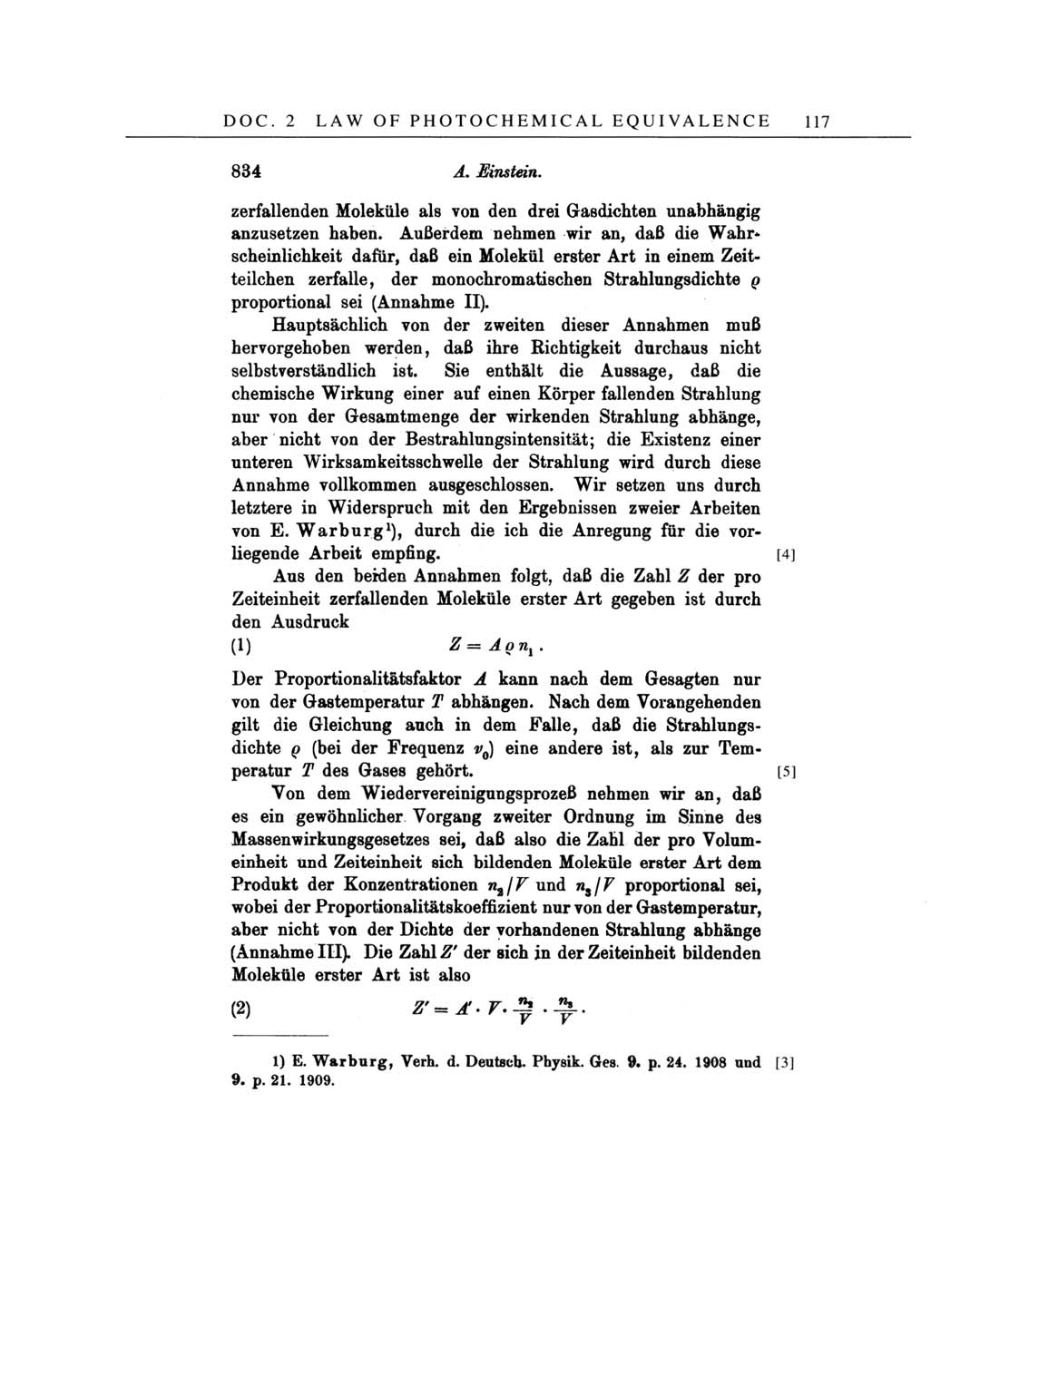 Volume 4: The Swiss Years: Writings 1912-1914 page 117